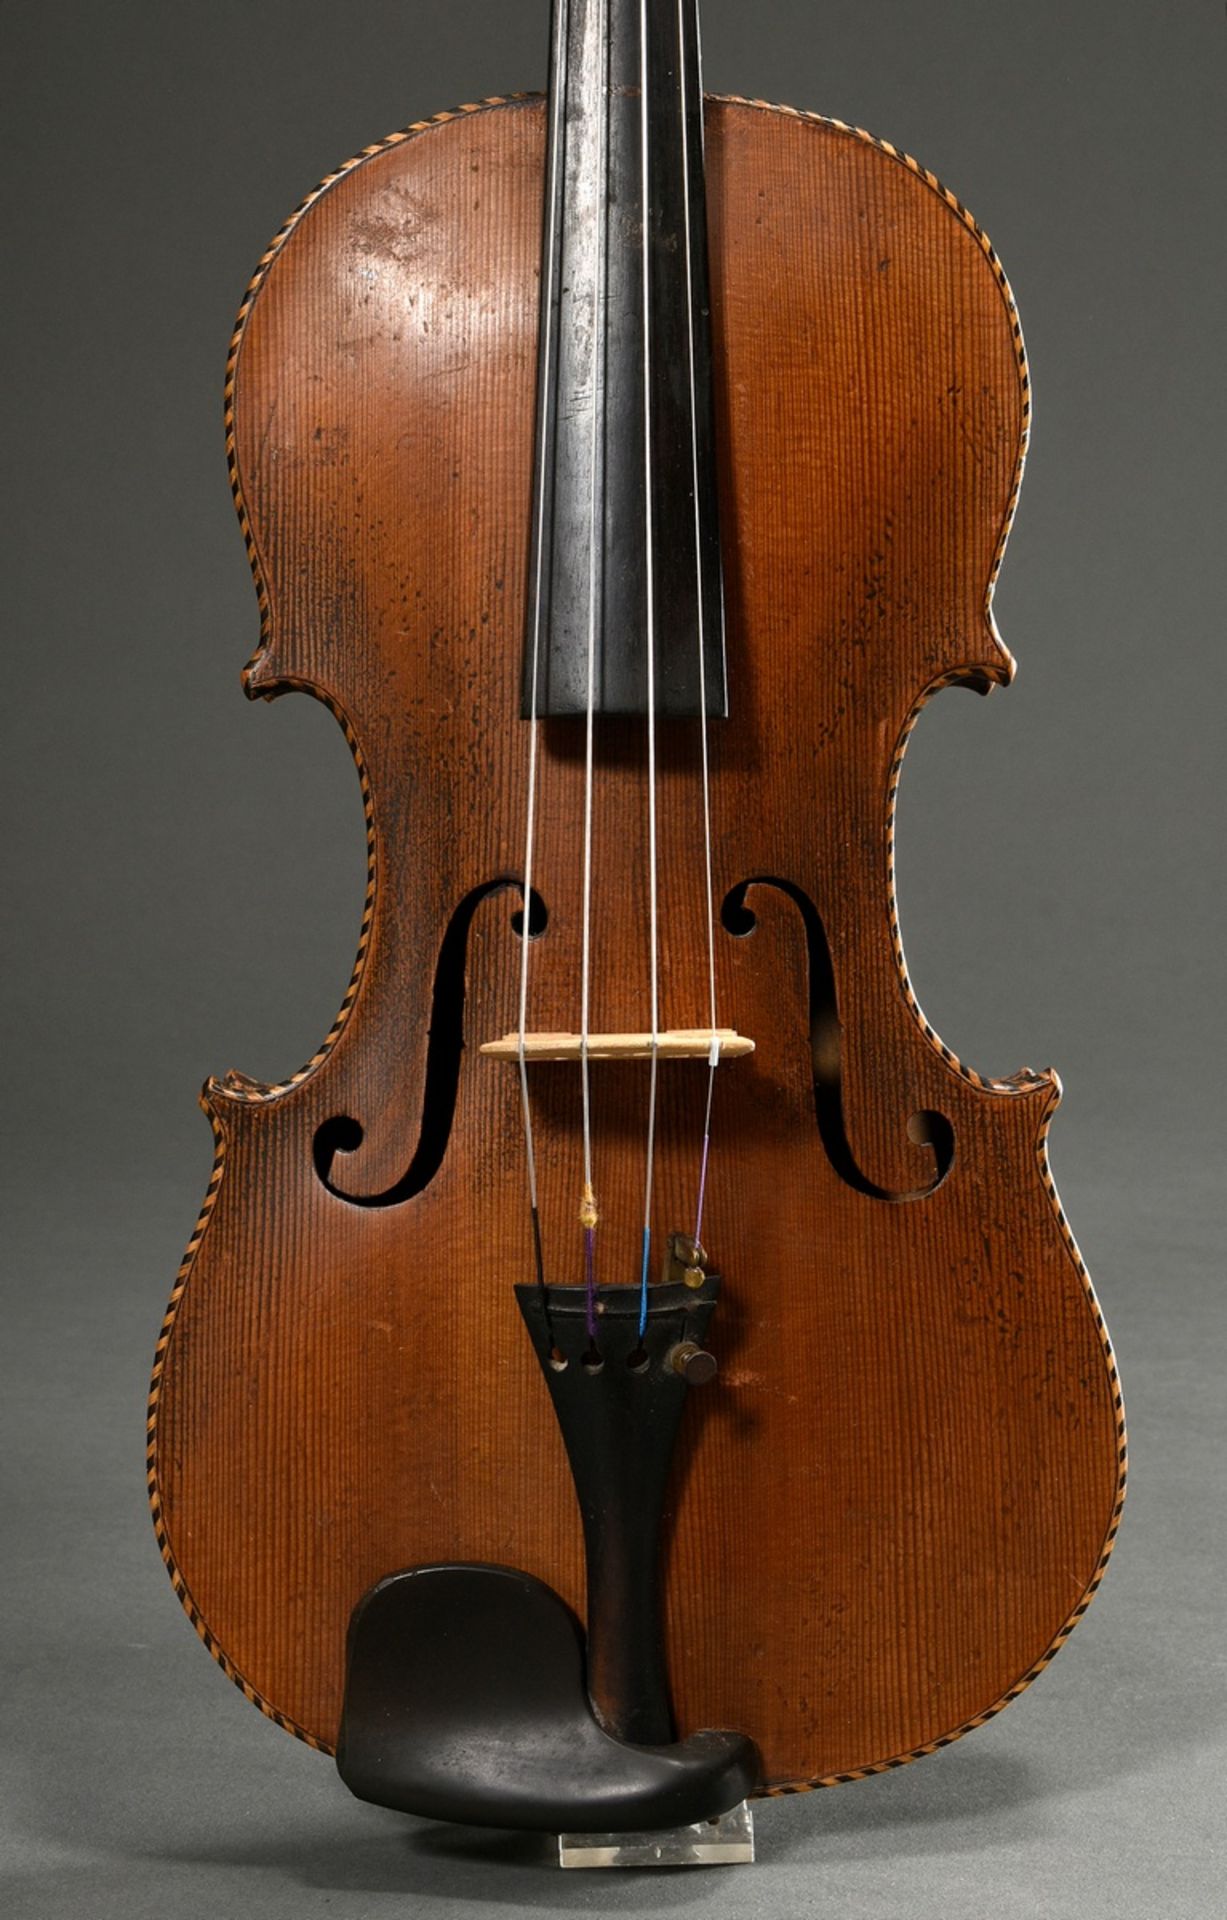 Historicizing violin, German, c. 1900, without label, one-piece back, surrounding checker band, hol - Image 11 of 11